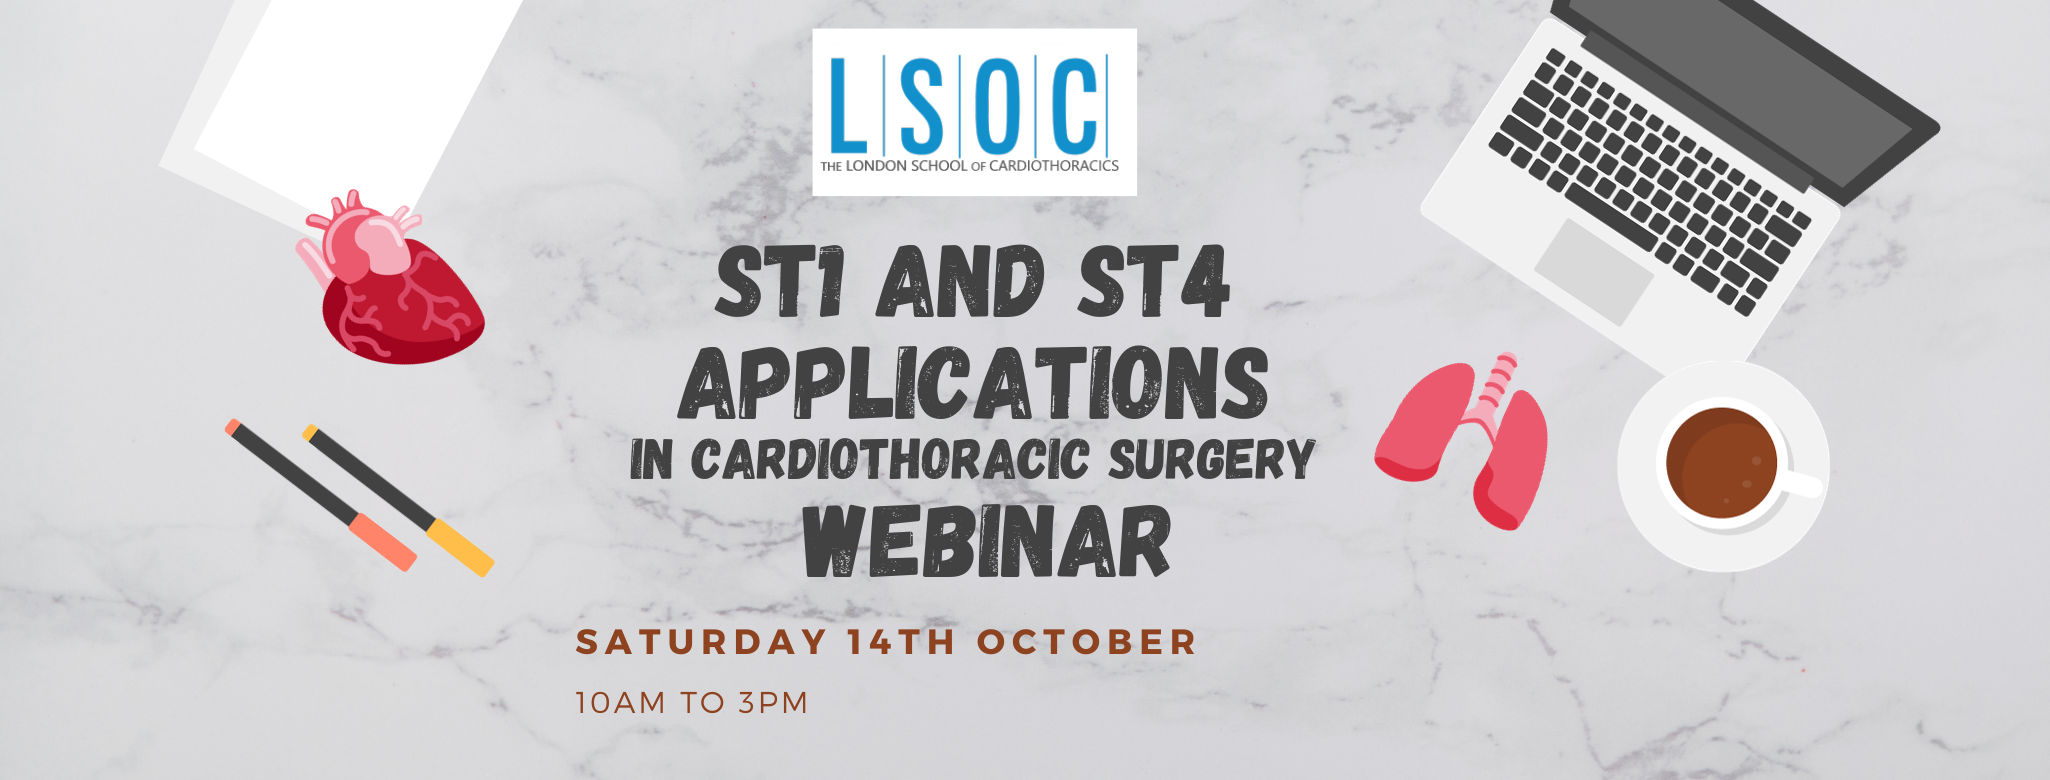 ST1+ST4 Applications in Cardiothoracic Surgery Webinar 